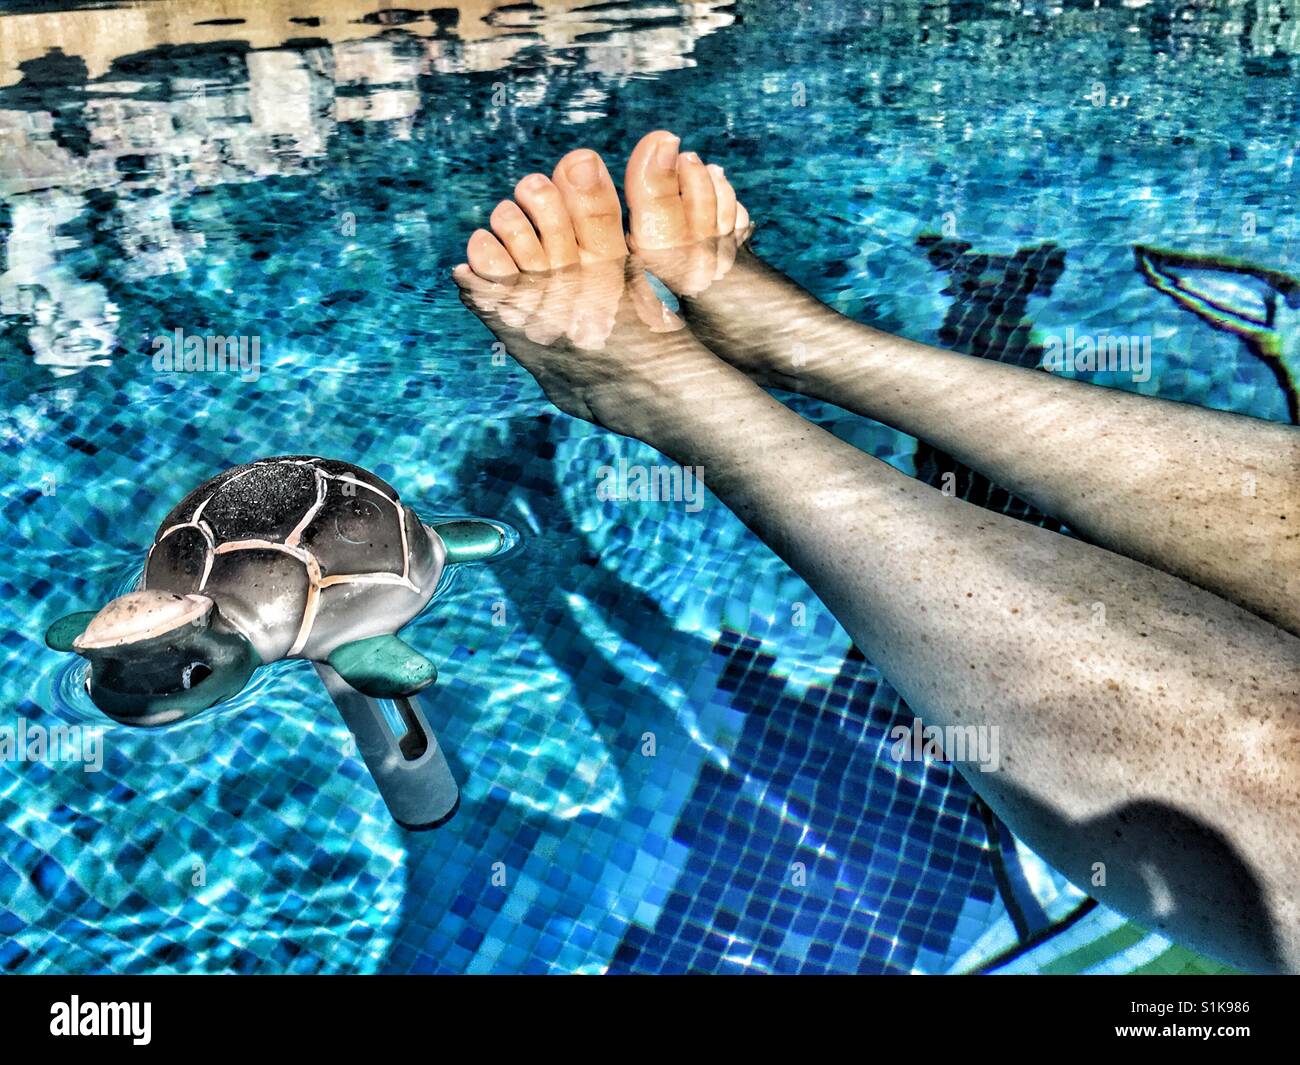 Woman's legs and feet in swimming pool next to a tortoise shaped pool thermometer Stock Photo